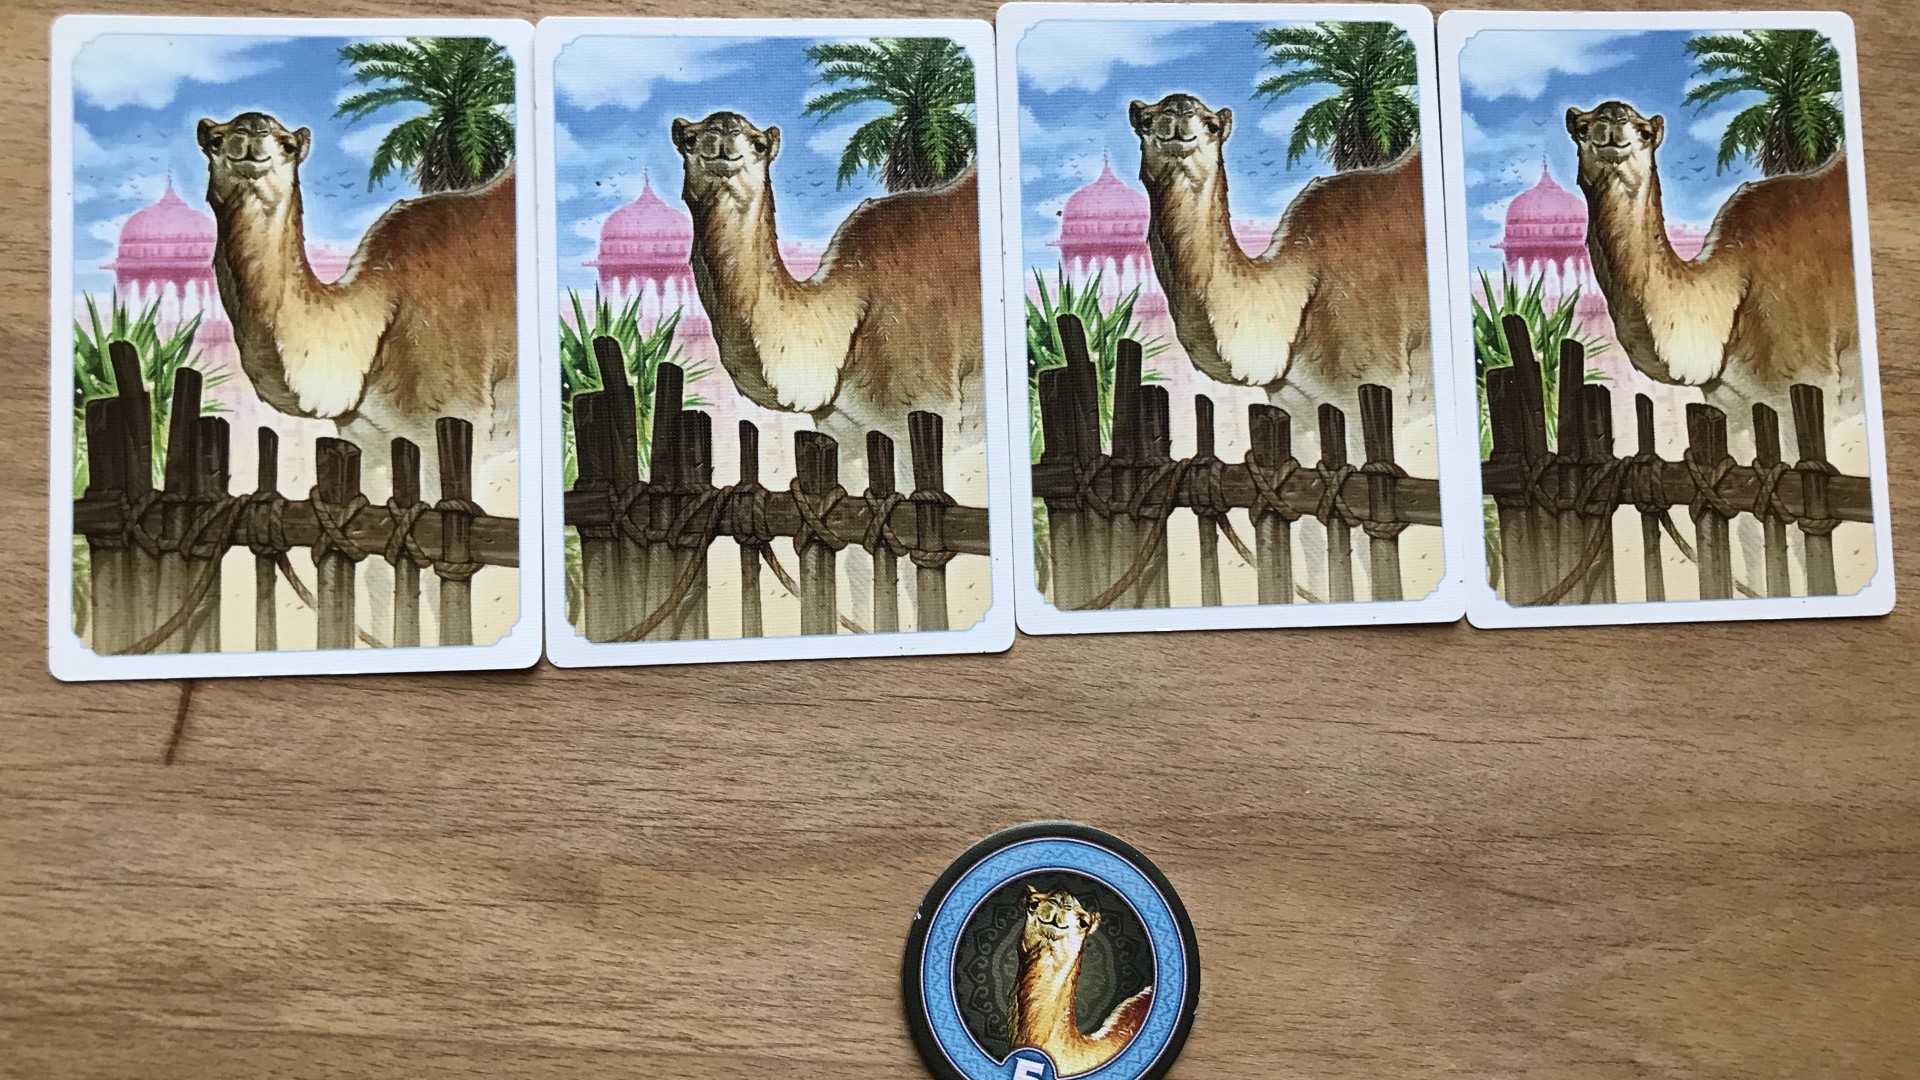 Jaipur board game - a row of four camels and a camel token